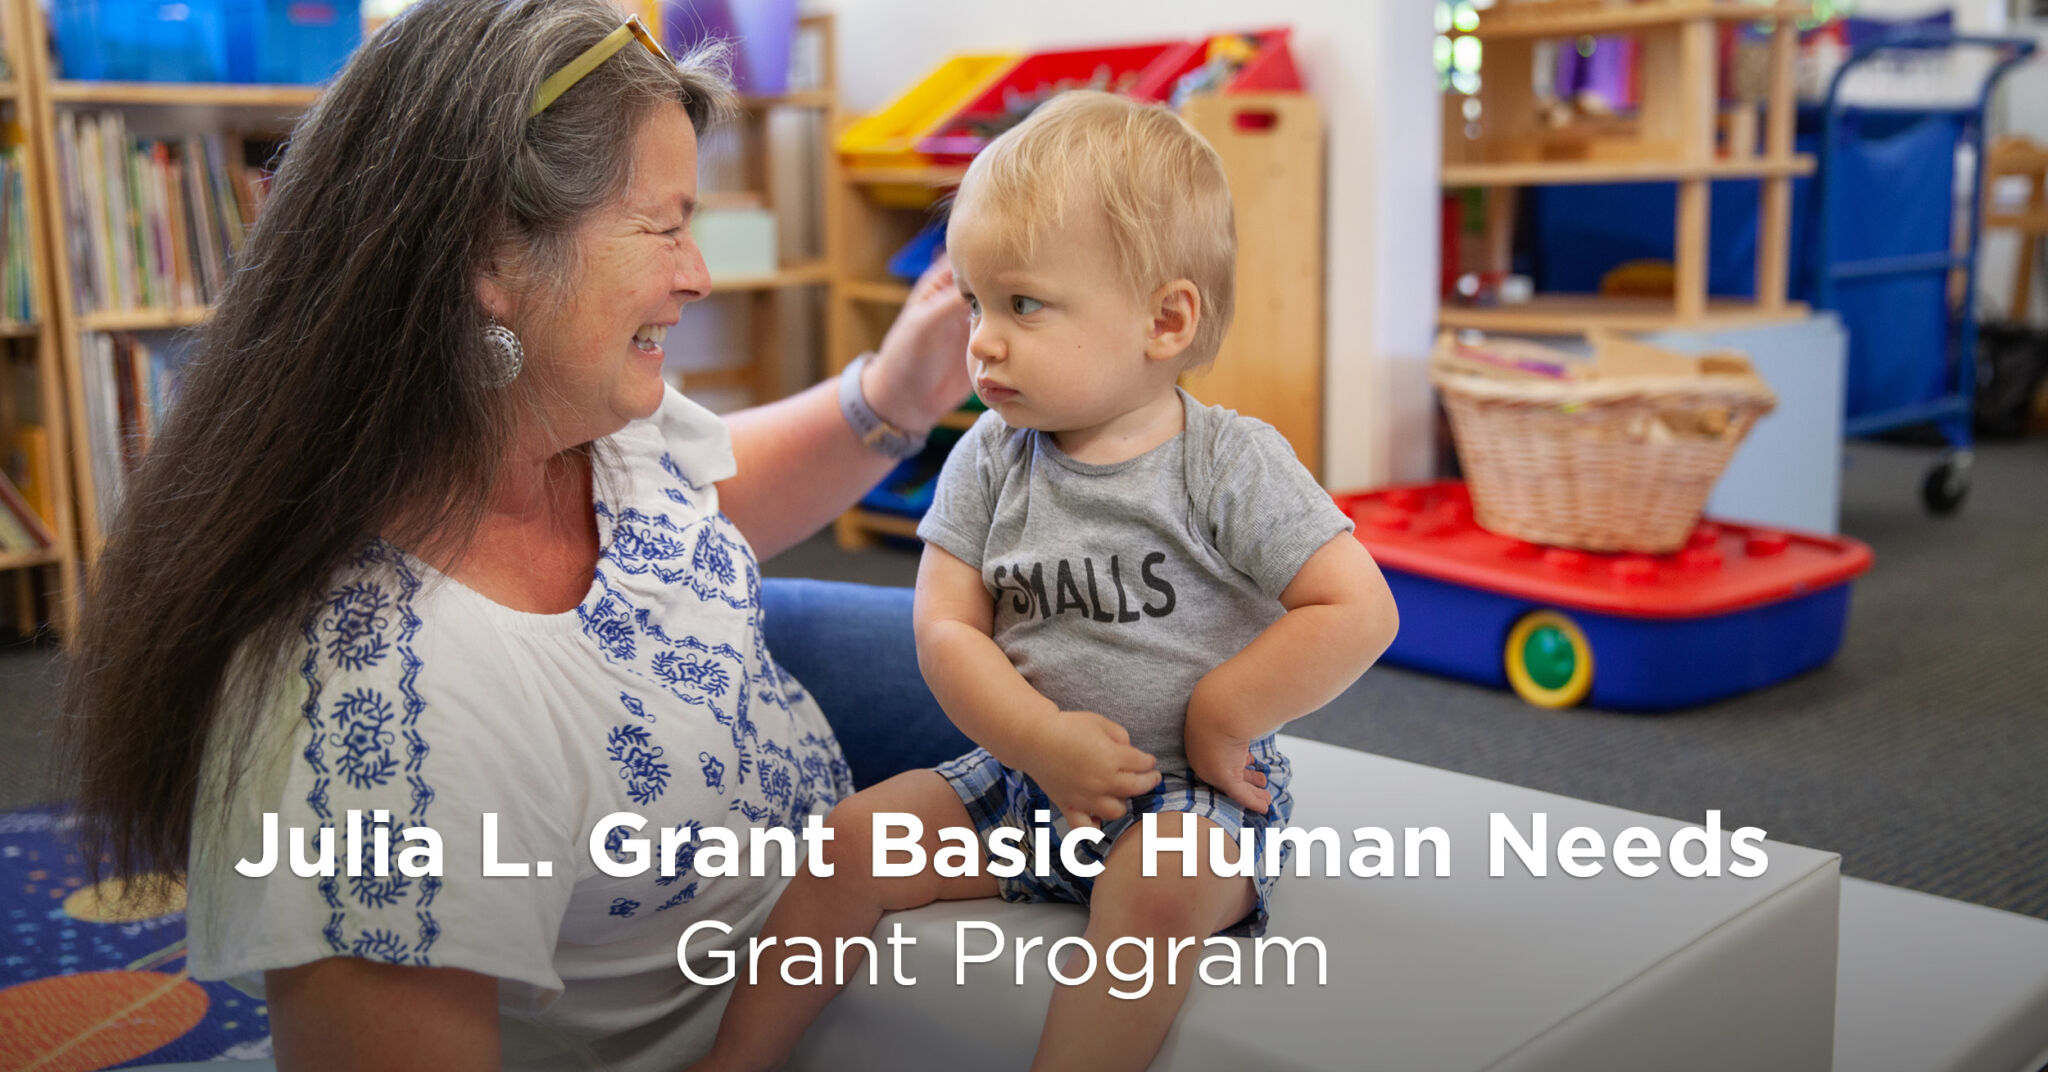 A woman smiling at a young child in a daycare. Text: Julia L. Grant Basic Human Needs Grants Program